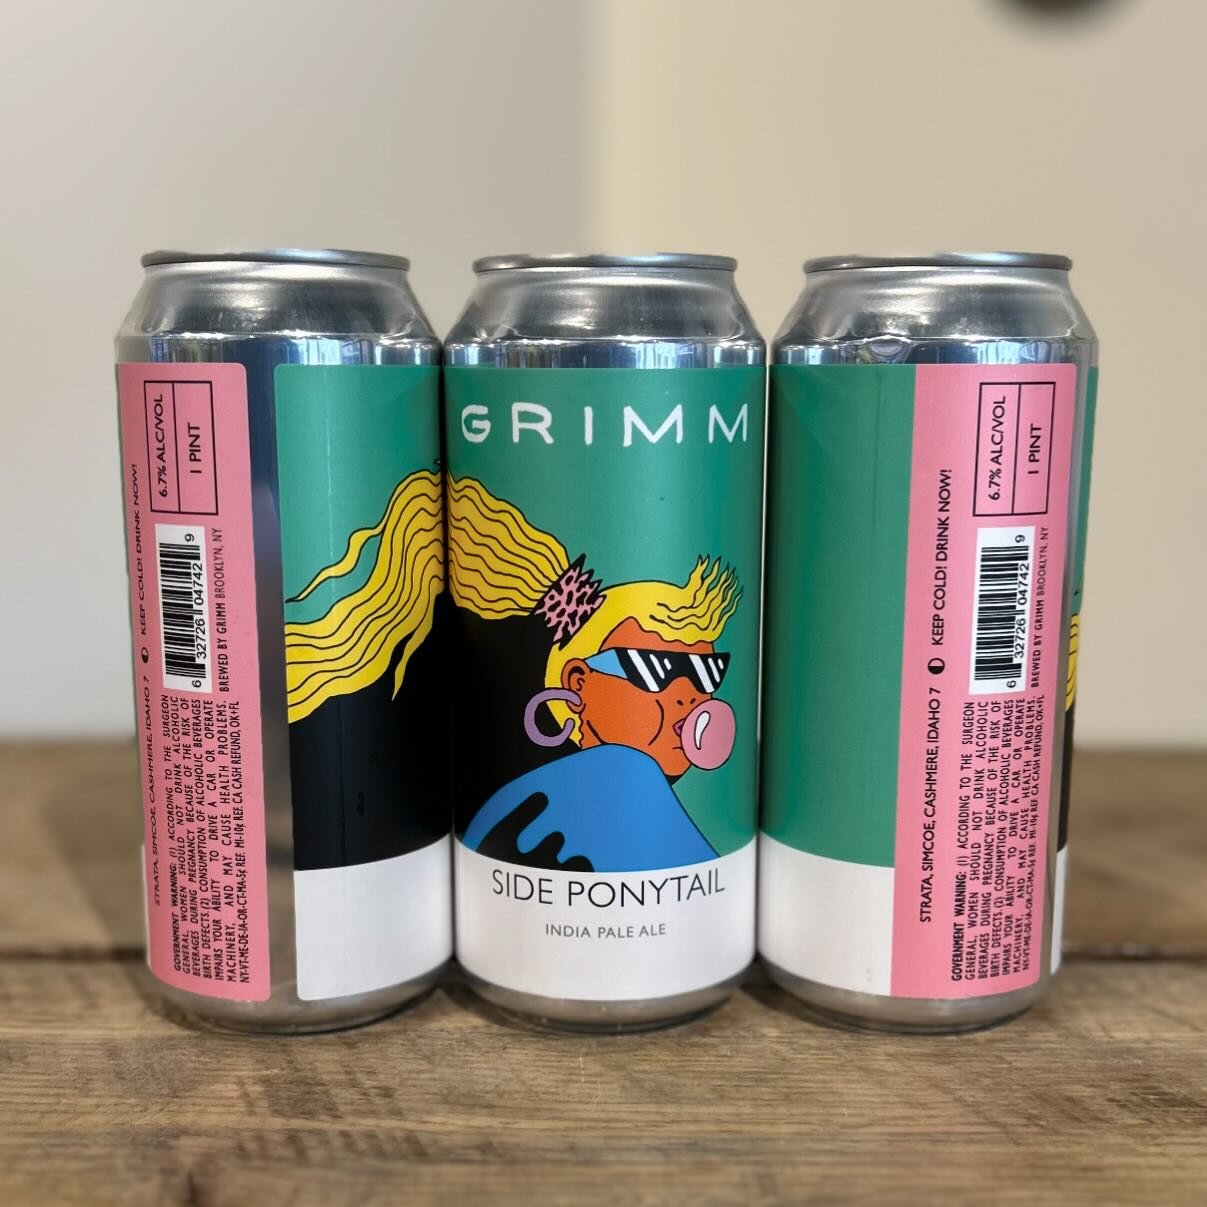 @grimmales is back in the shop this week #NowAvailable #SudburyCraftBeer #TheSuds
&mdash;
Side Ponytail! Pouring a glowing translucent yellow, this sassy, delicate, and radiant IPA features a tasty quadfecta of Strata, Simcoe, Cashmere, and Idaho 7. 